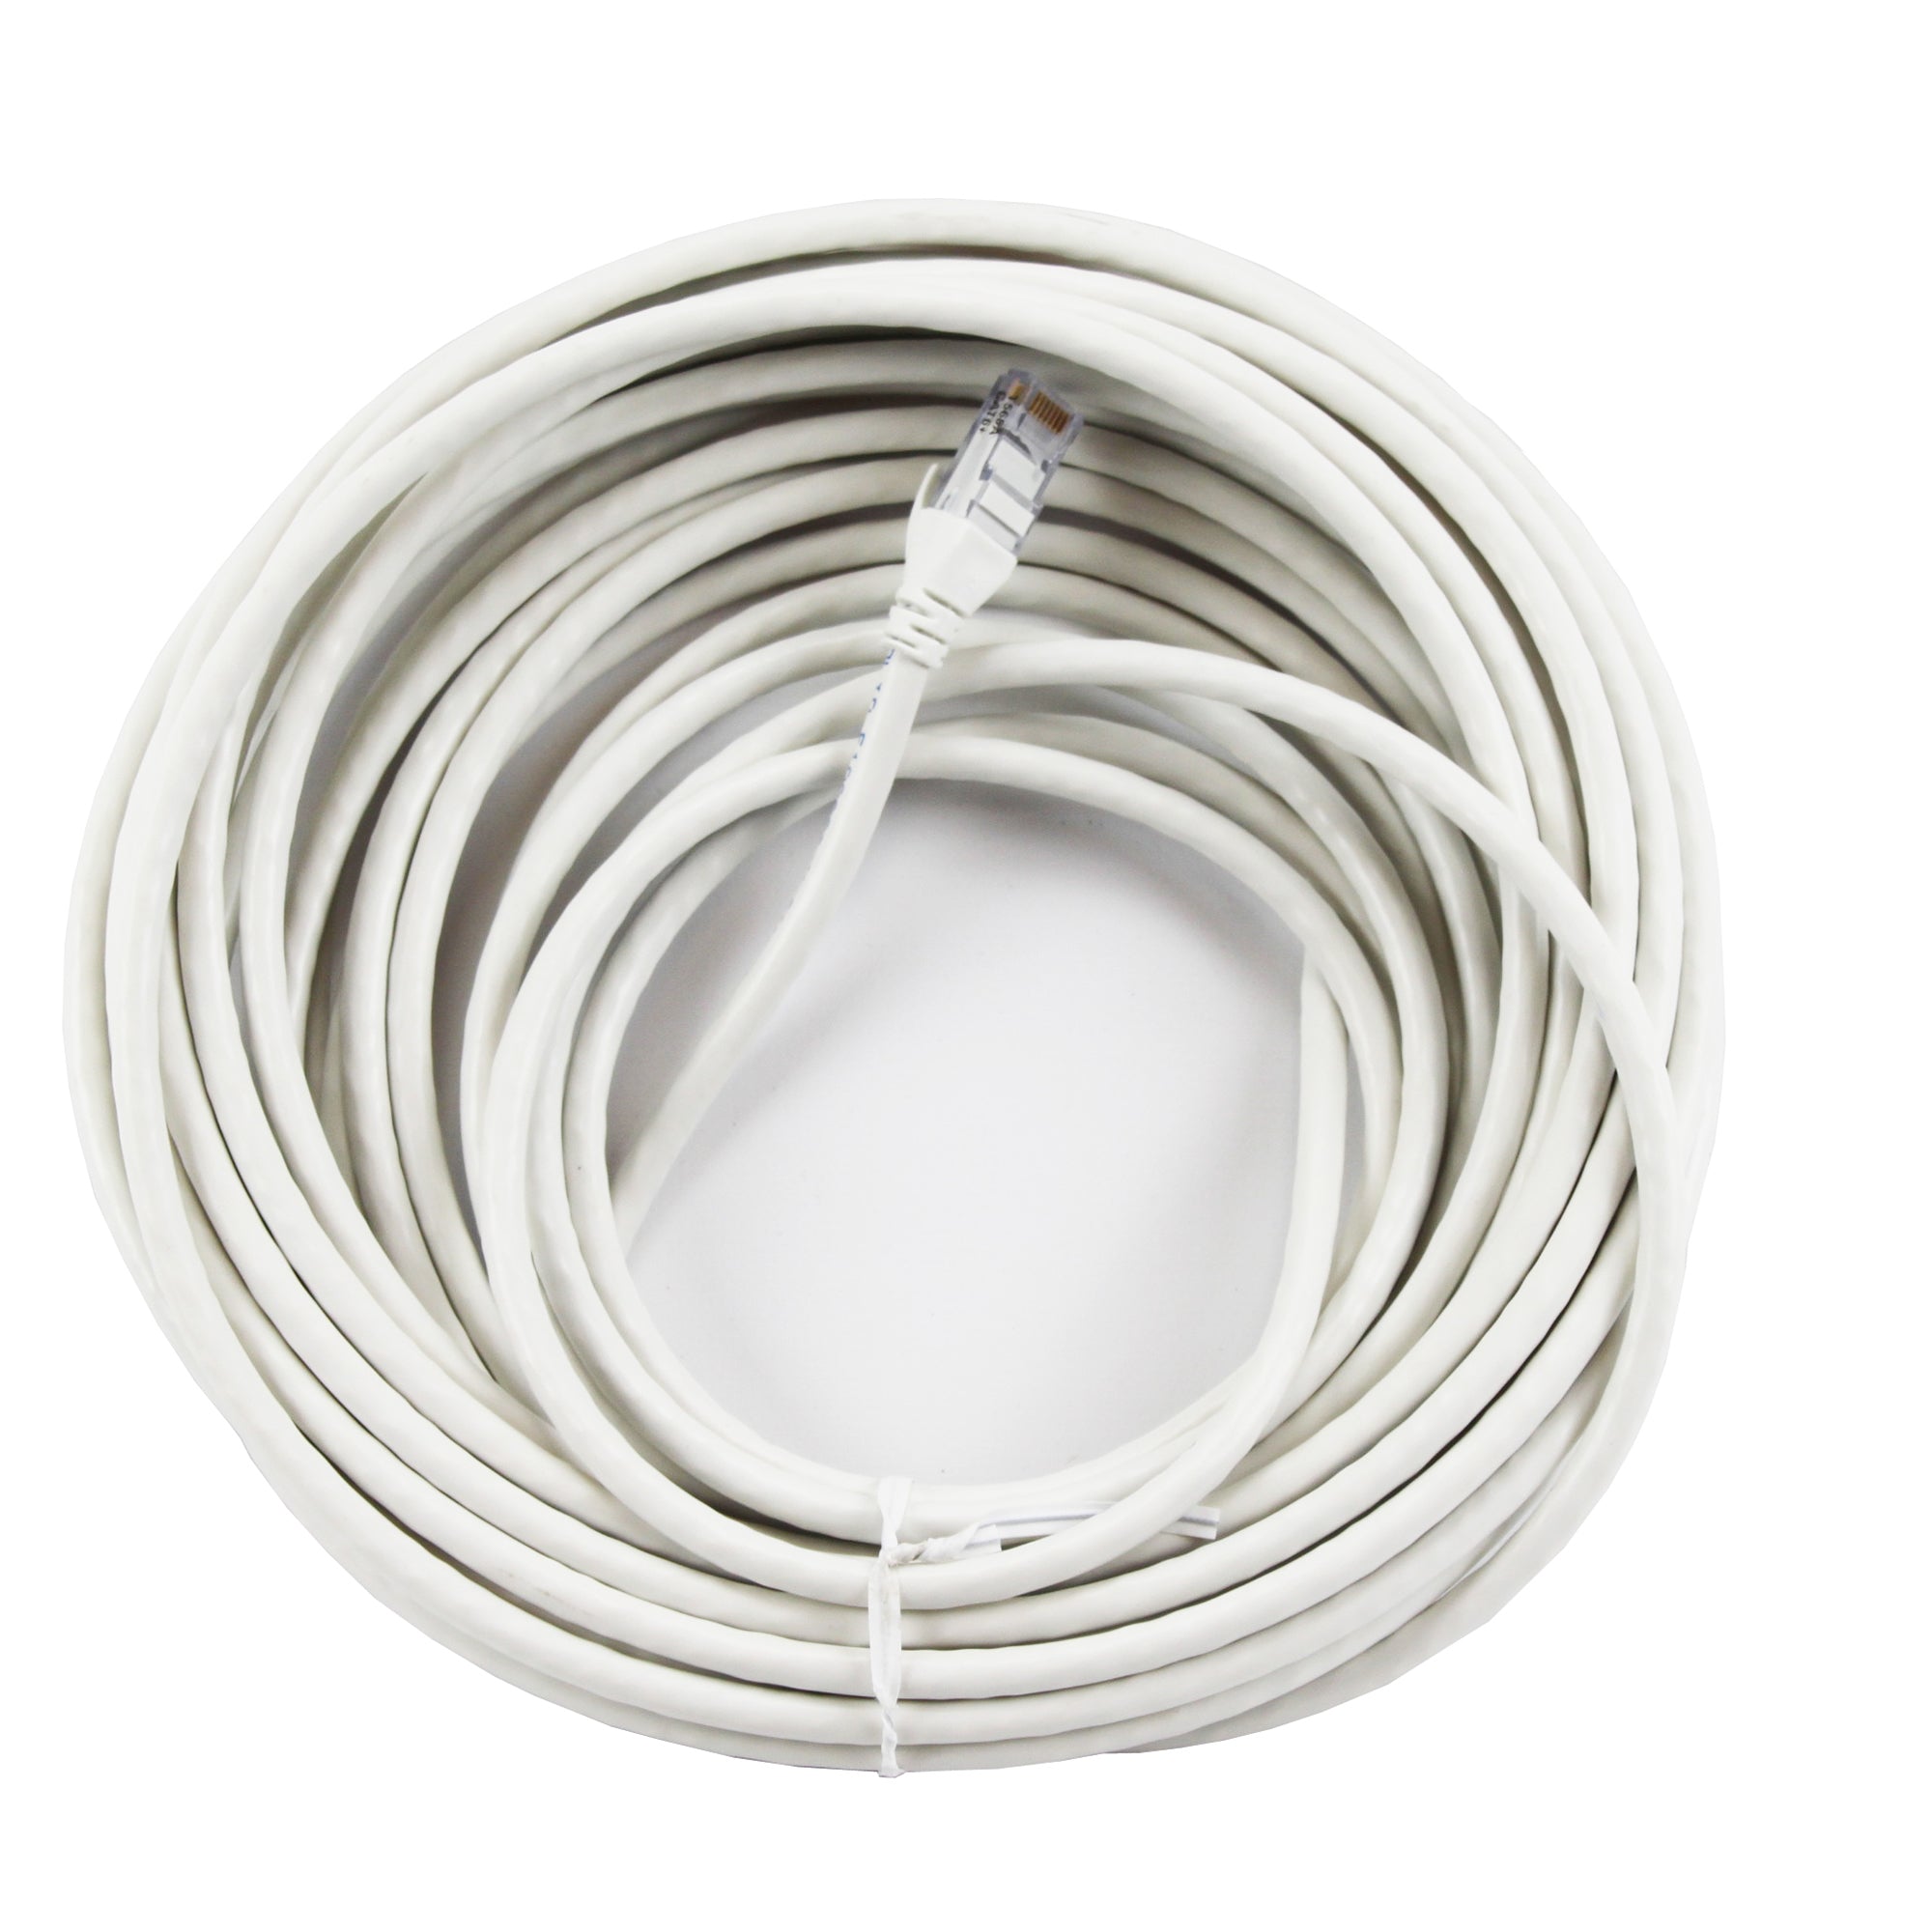 Belden, BELDEN AX350528 35' WHITE 4 PAIR 23AWG CAT6 PATCH CORD CABLE - WHITE OPEN END